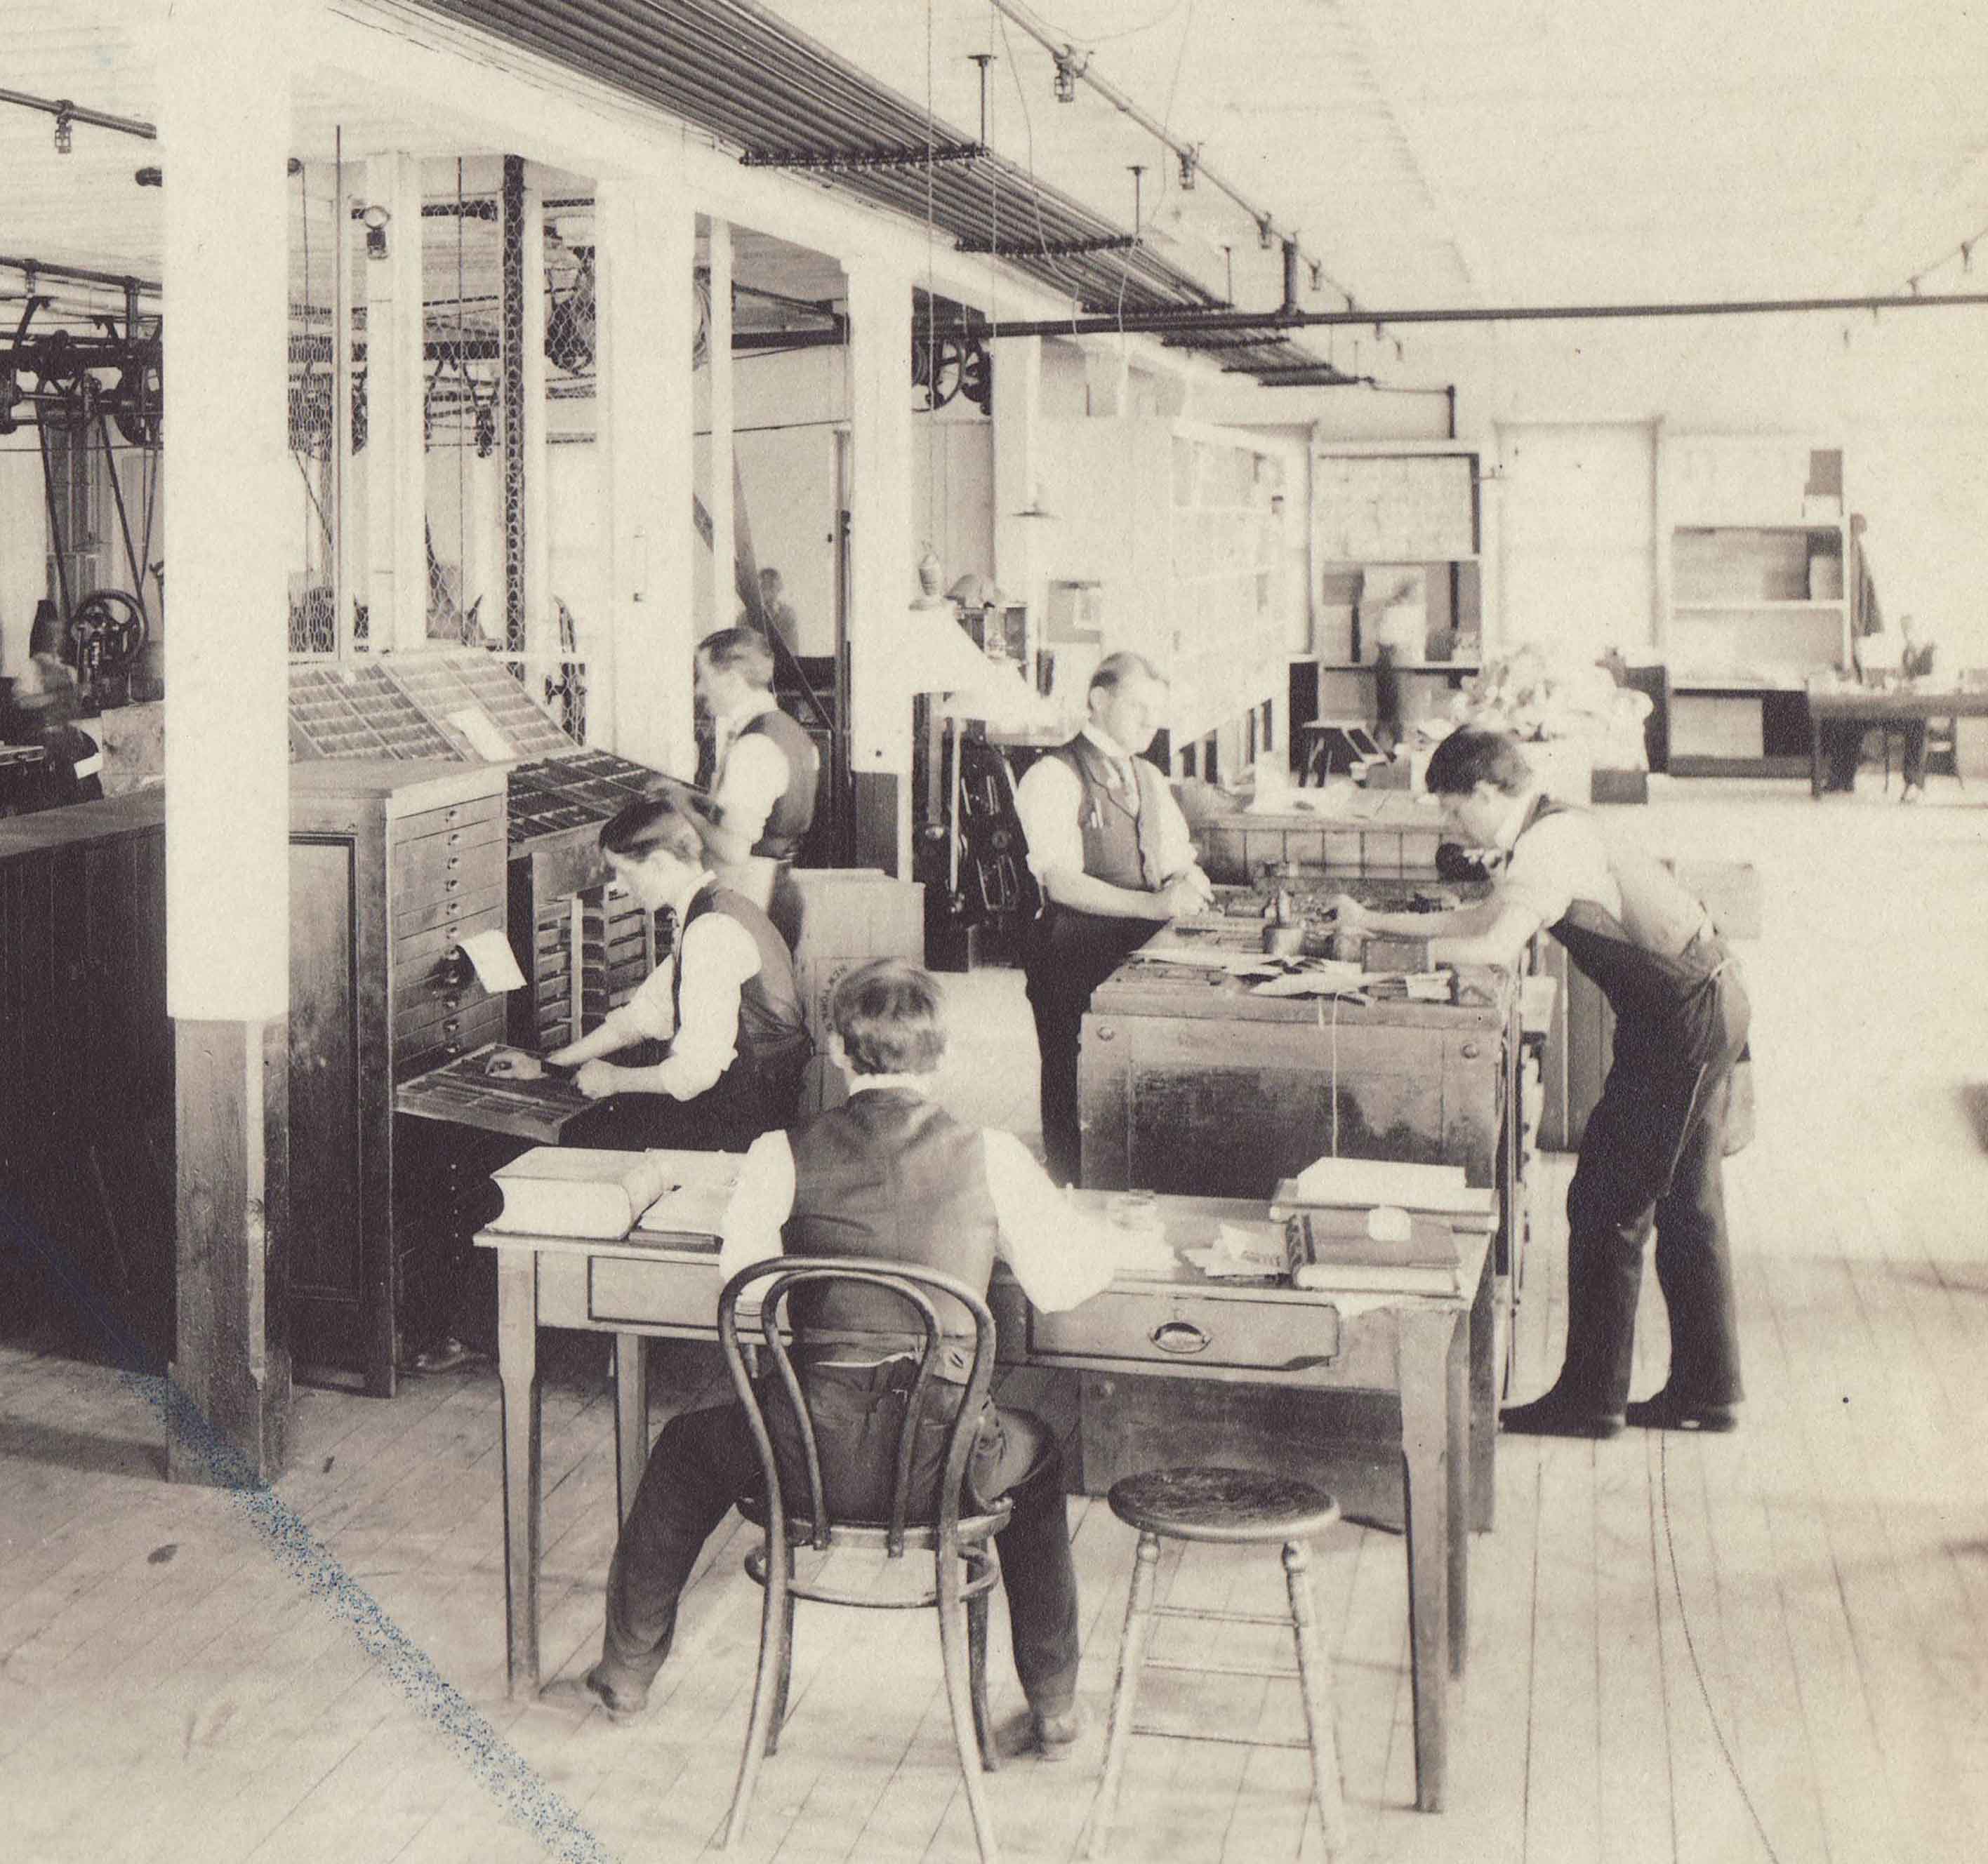 Employees in the Johnson & Johnson Printing Department, 1910s